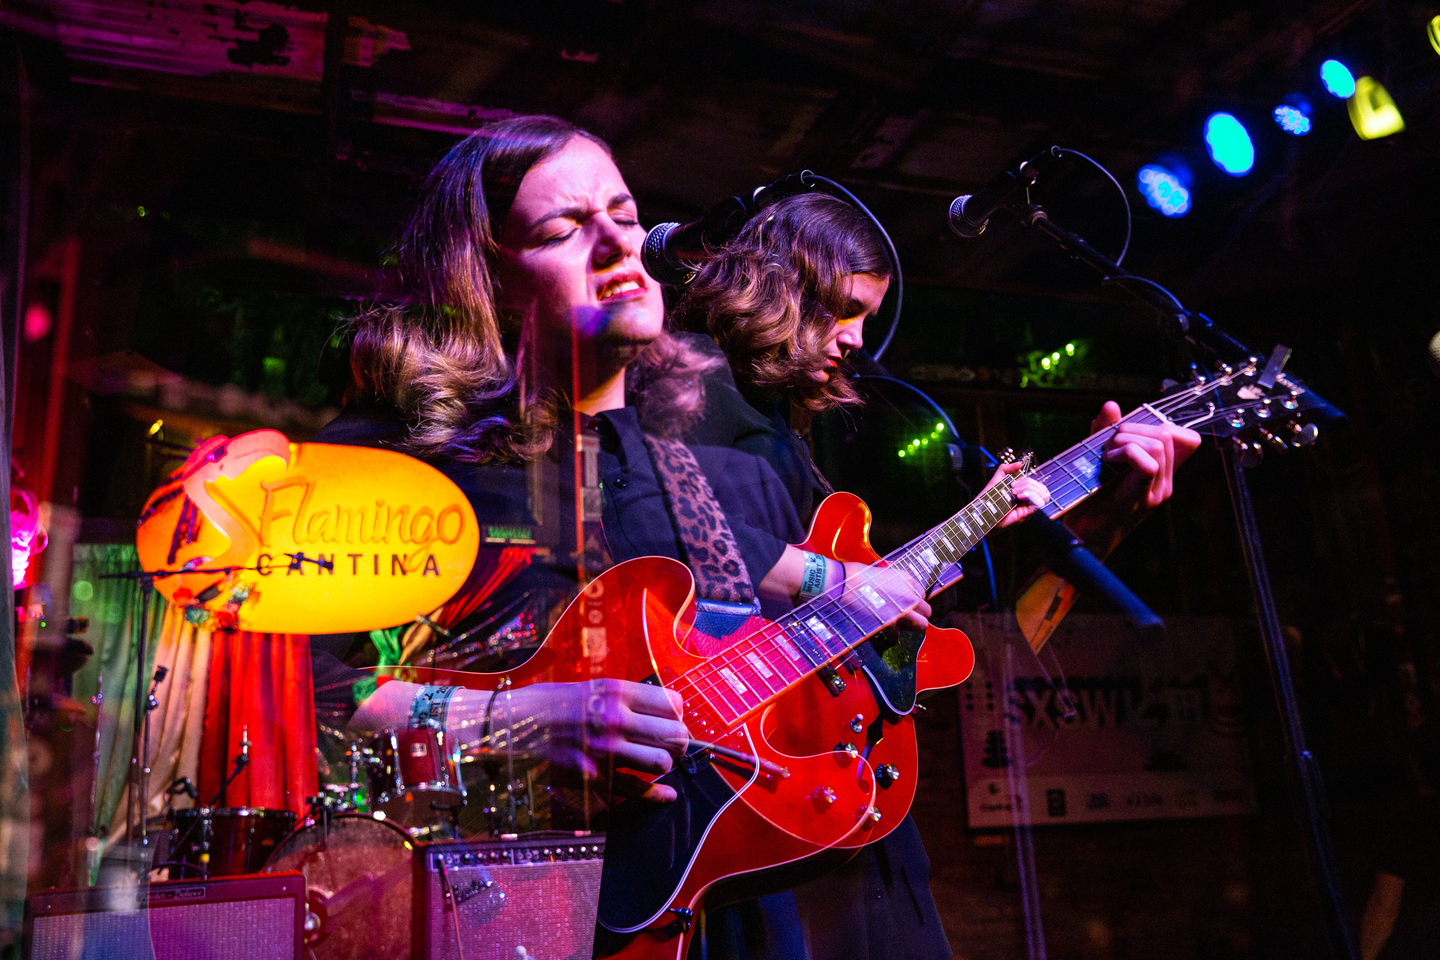 Fer Casillas at Flamingo Cantina, presented by Sounds from Mexico – Photo by KArla Bruciaga